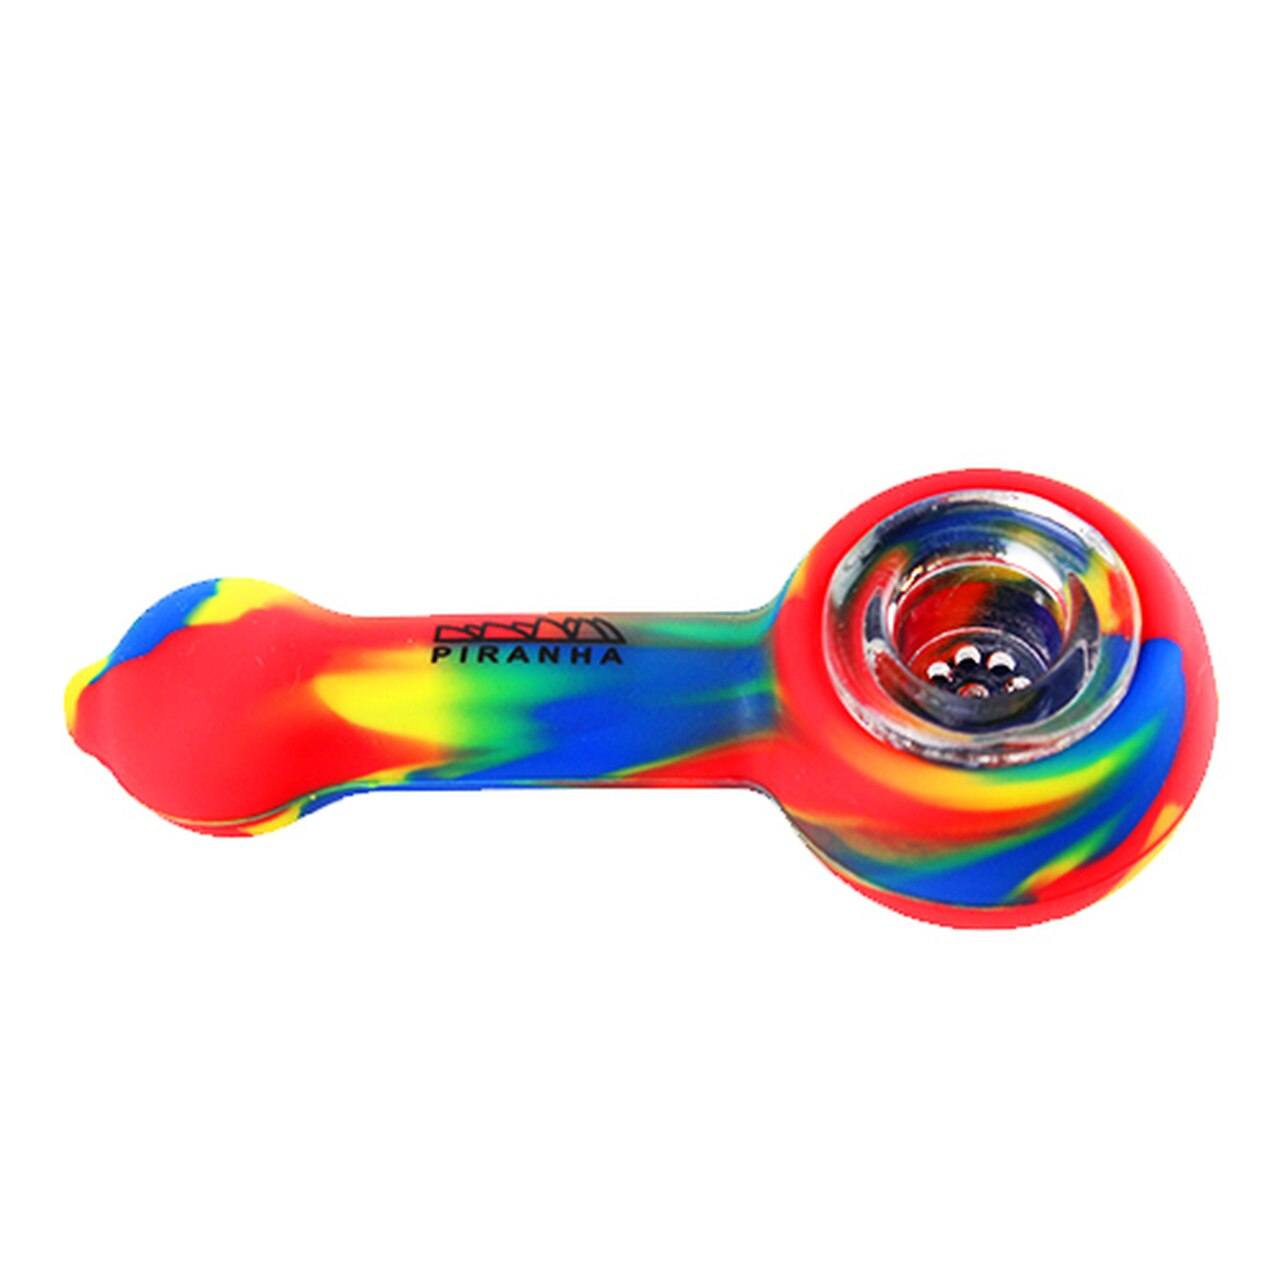 Piranha Silicone Hand Pipe 4" Spoon w/ Glass Bowl - Assorted Colors Flower Power Packages Default 